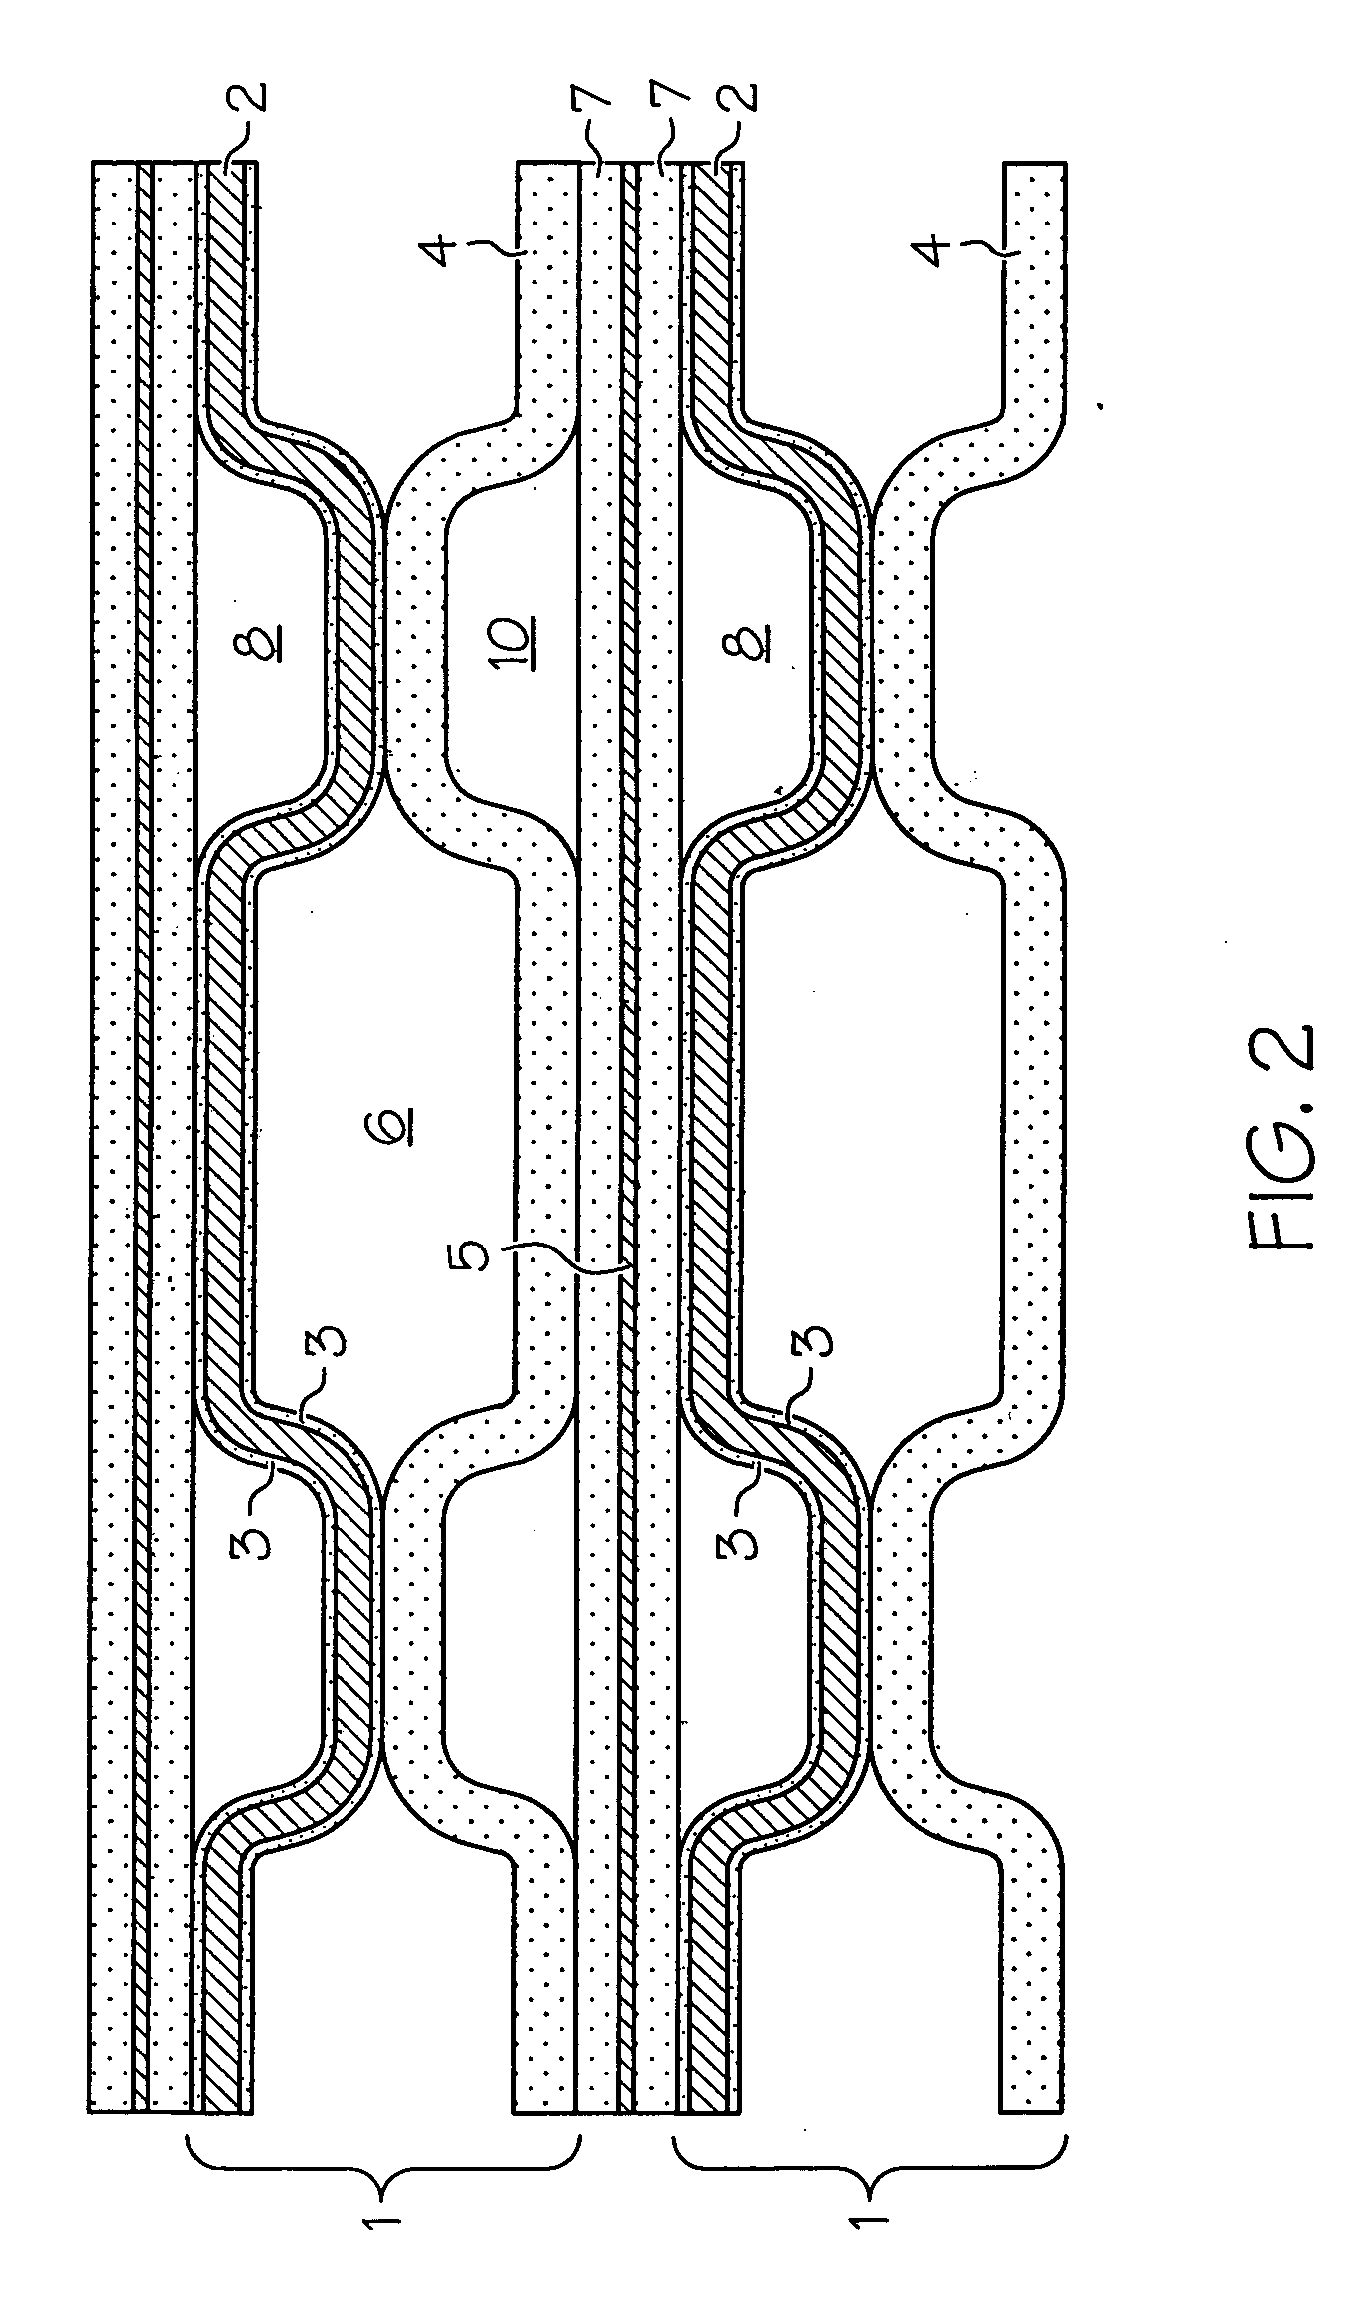 Hybrid bipolar plate assembly and devices incorporating same